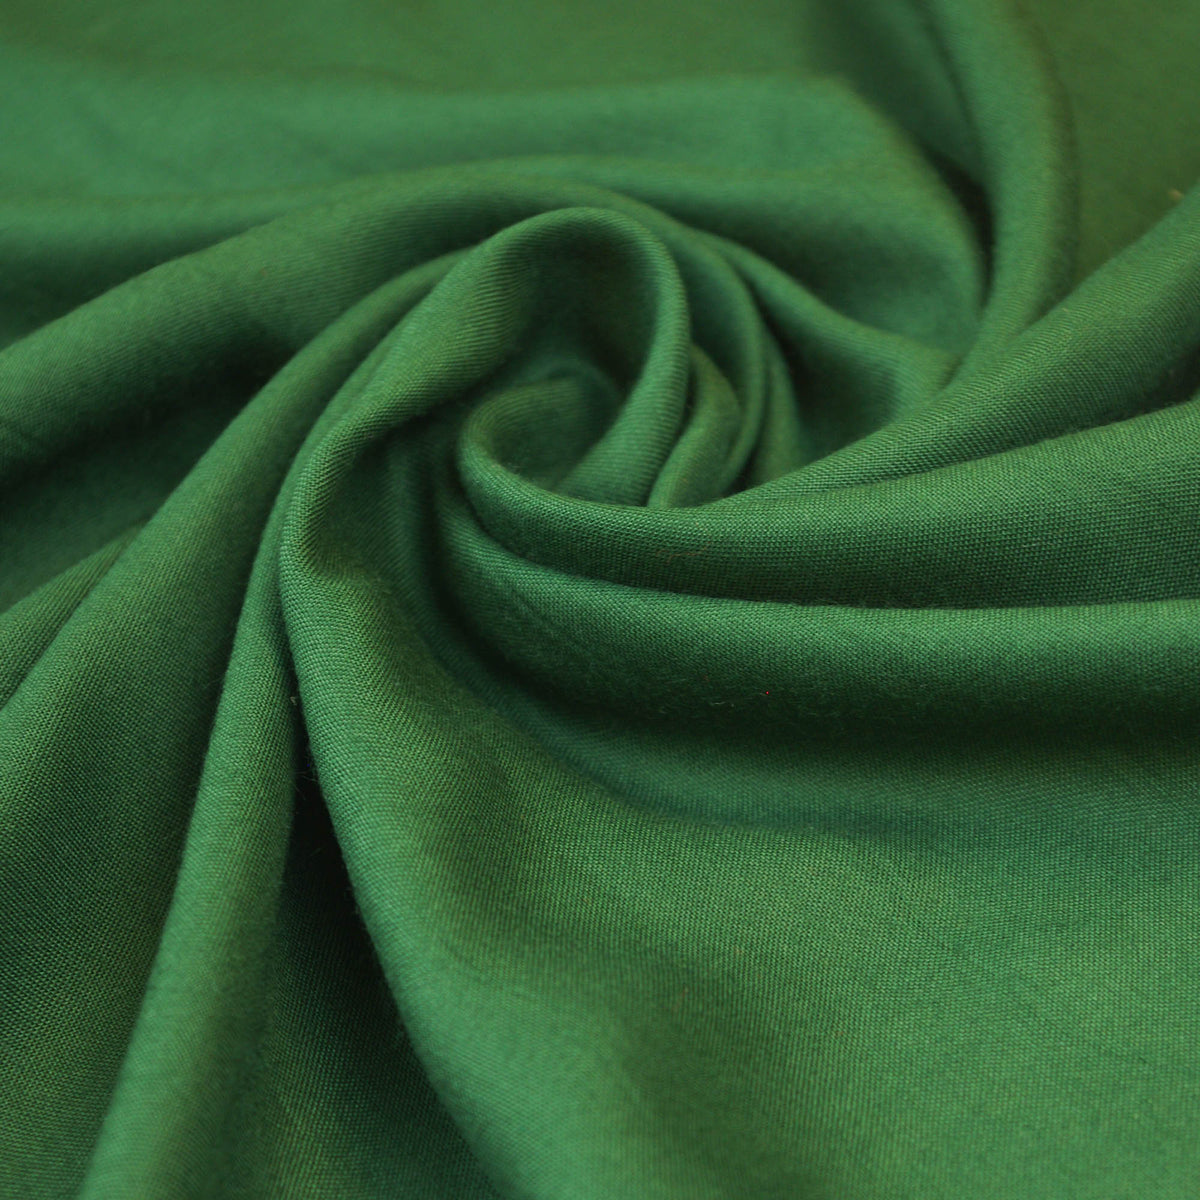 Rayon Cotton Fabric 58'' Wide - Green